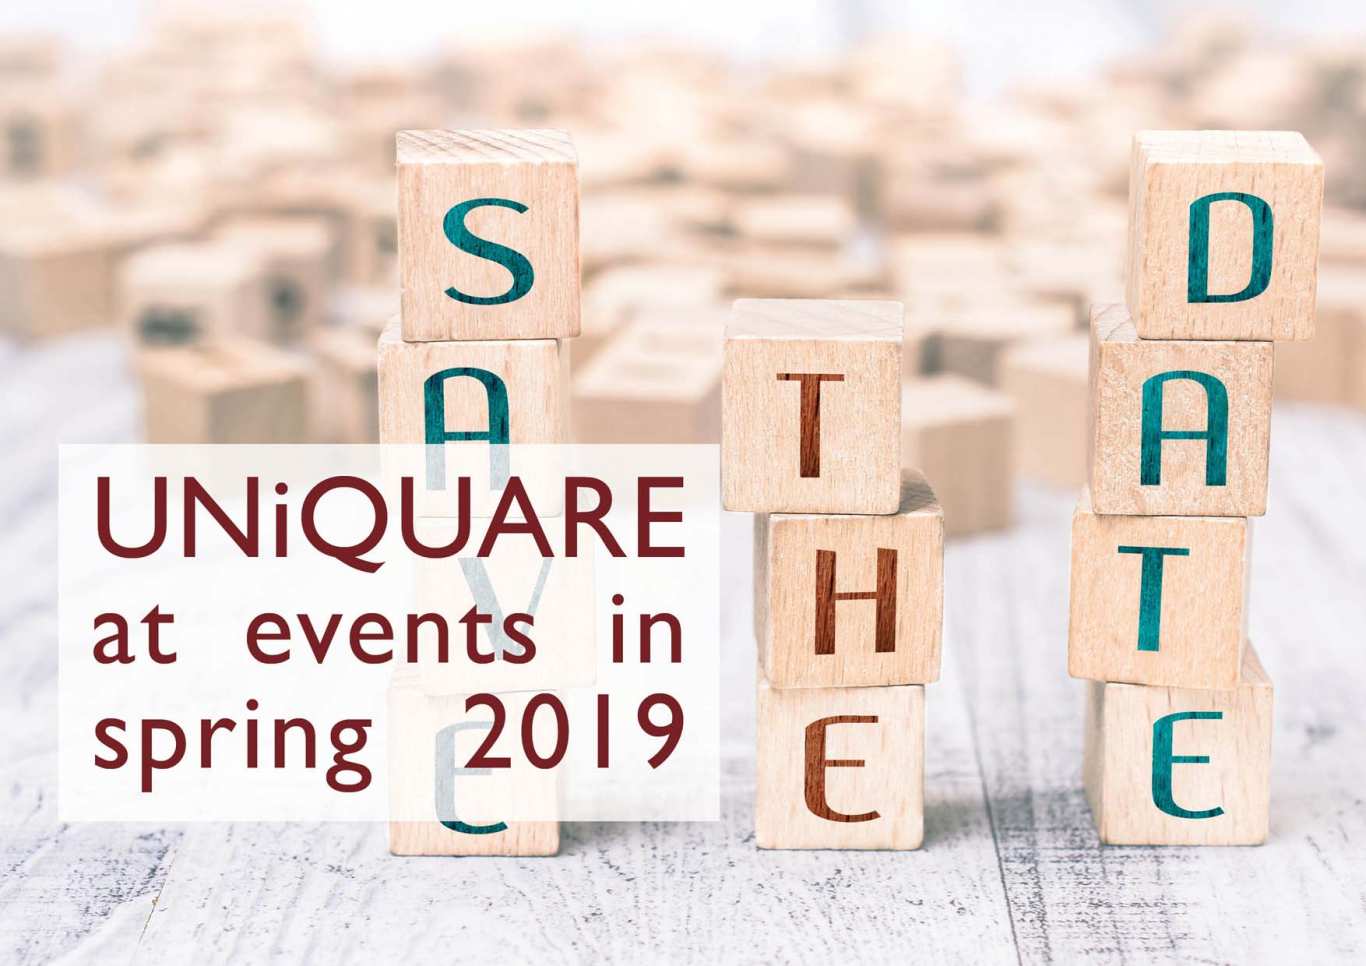 You are currently viewing Meet colleagues from UNiQUARE at the following events in spring 2019